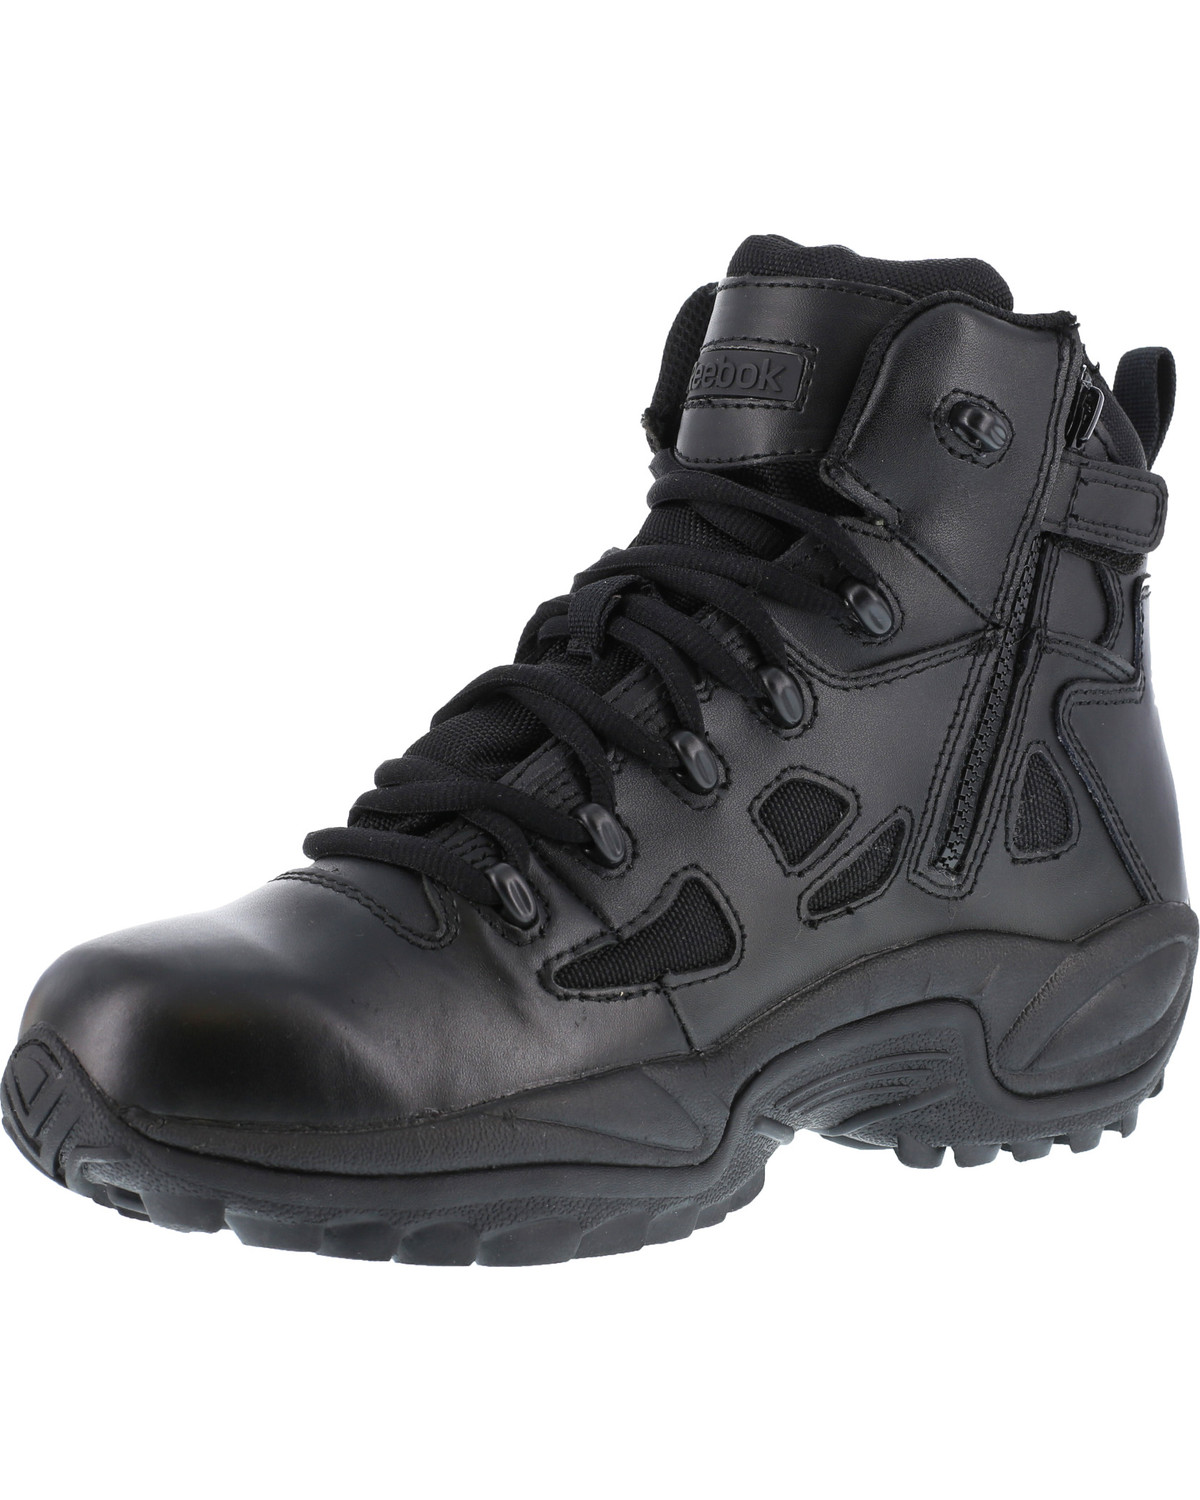 Reebok Work  Mens Rapid Response Rb 6 Inch Side Zip   Work Safety Shoes Casual - image 2 of 5